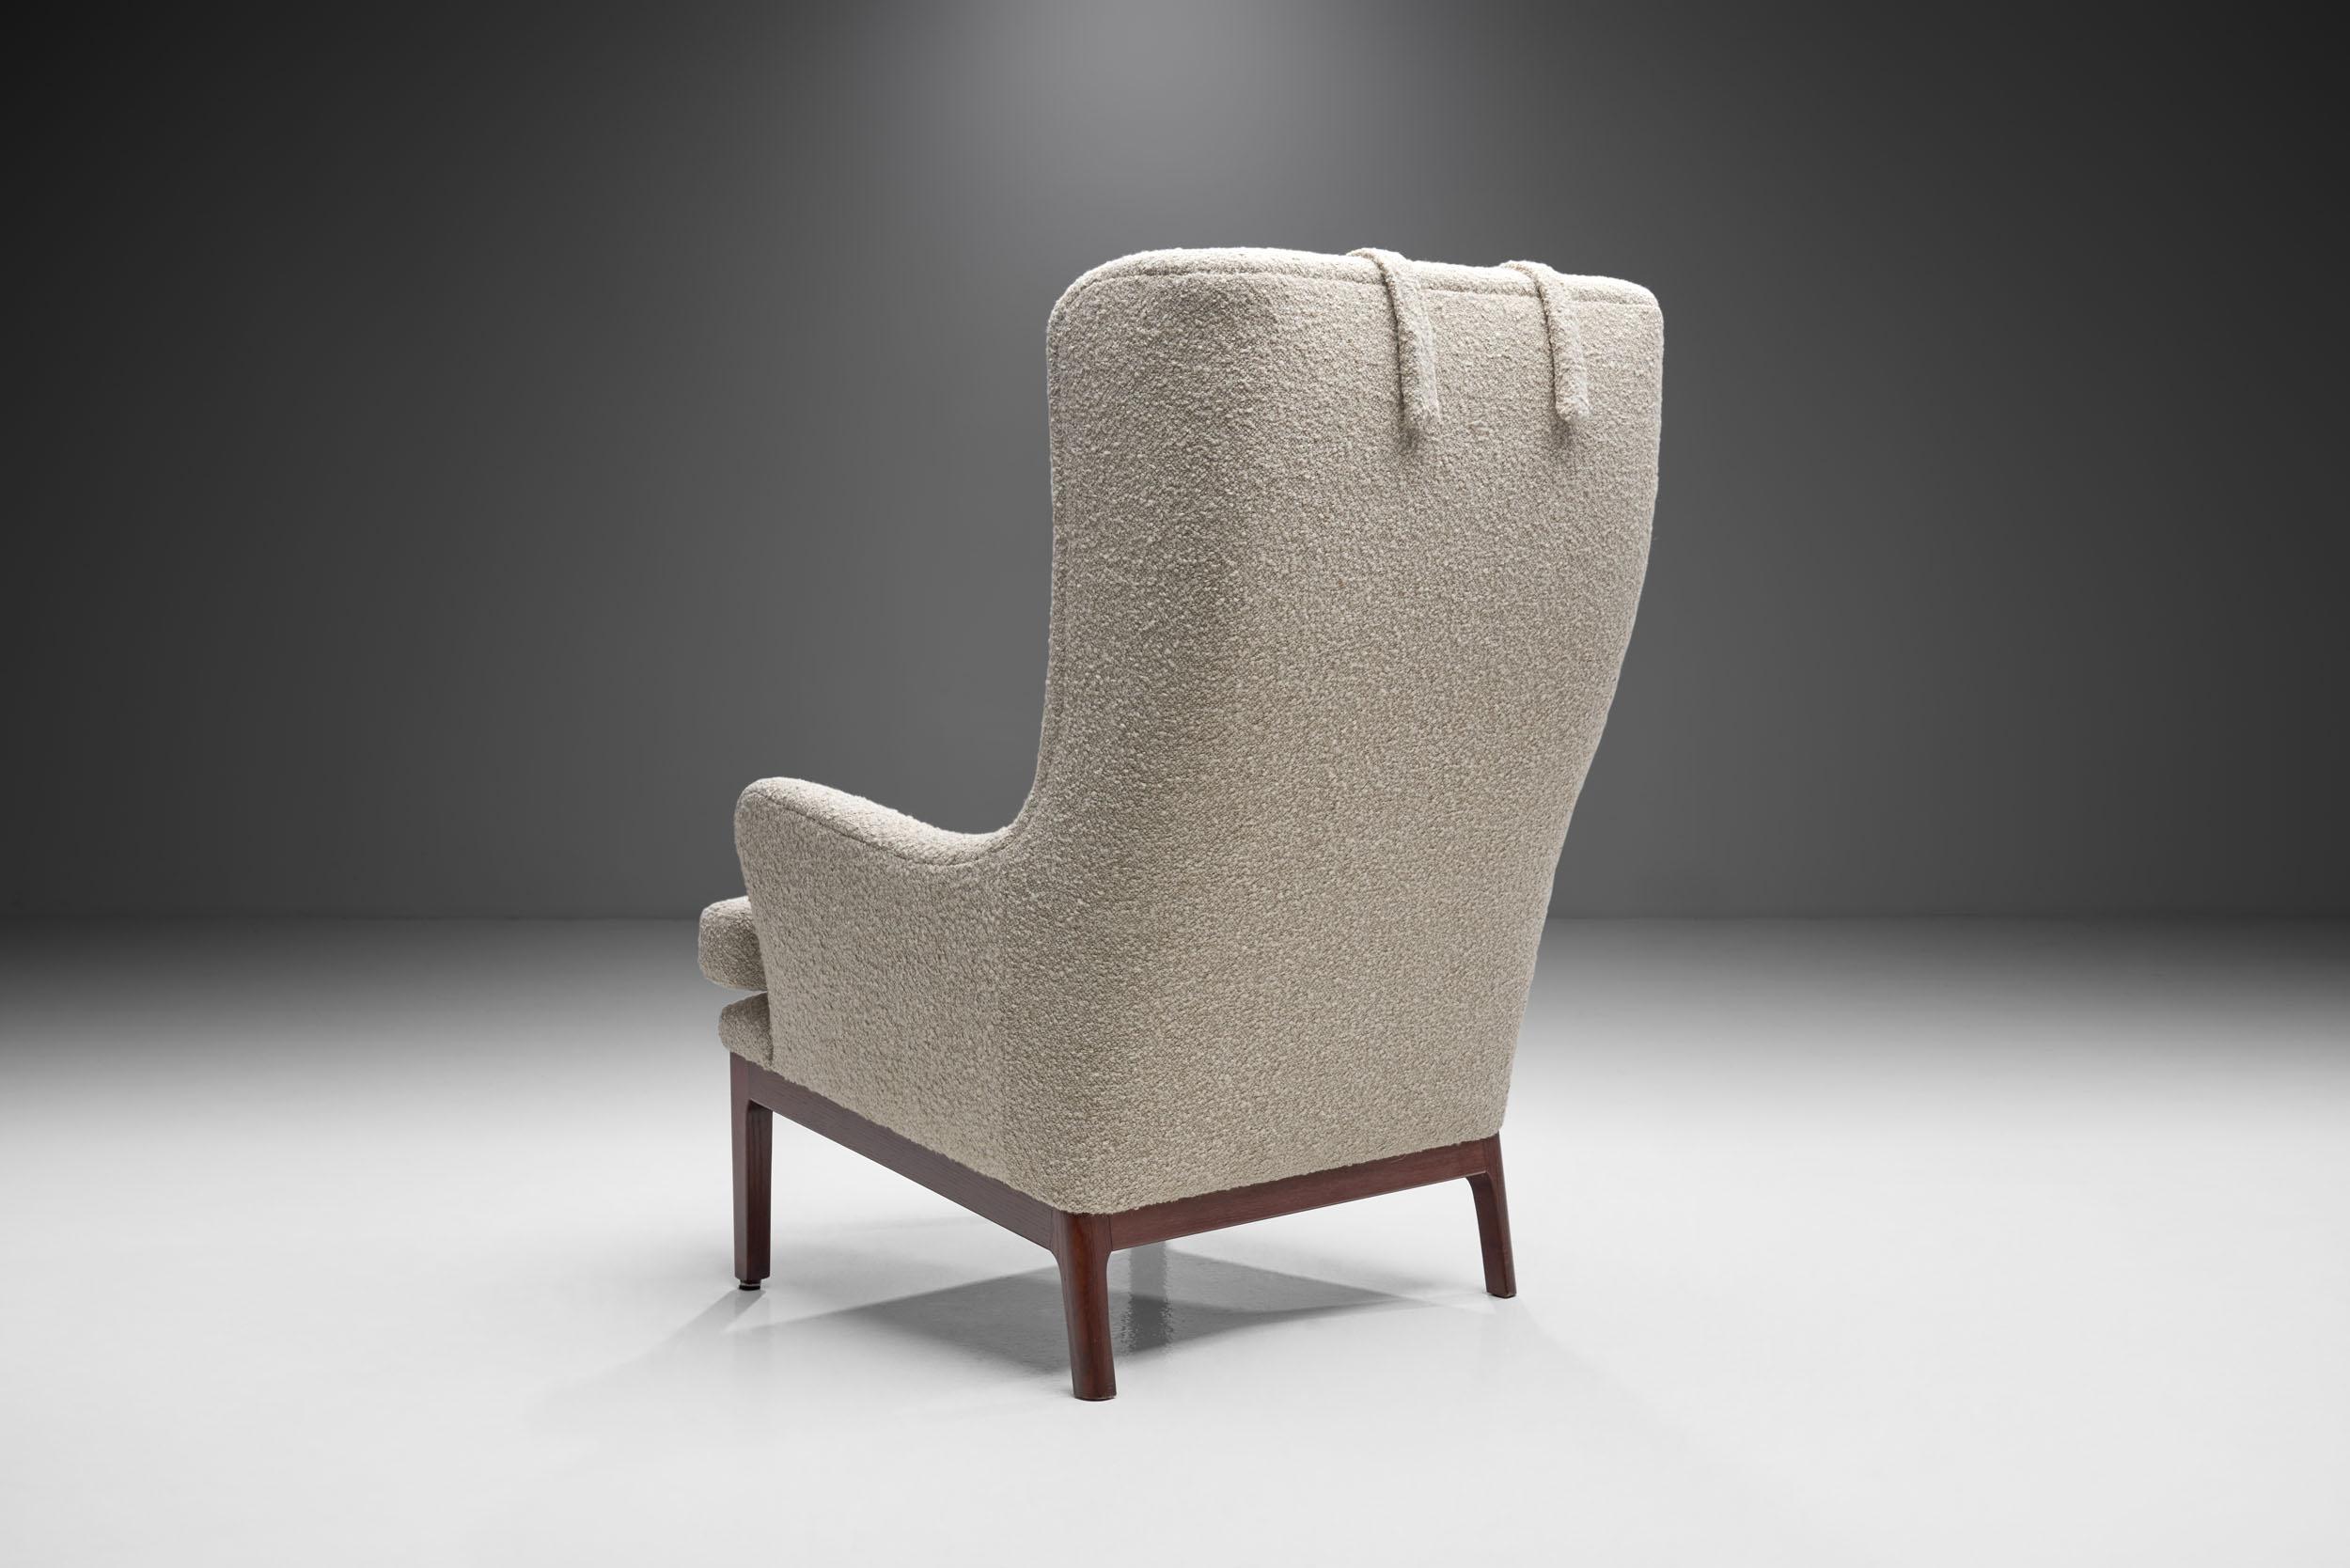 Mid-20th Century “Krister” Armchair by Arne Norell for AB Arne Norell Aneby, Sweden, 1960s